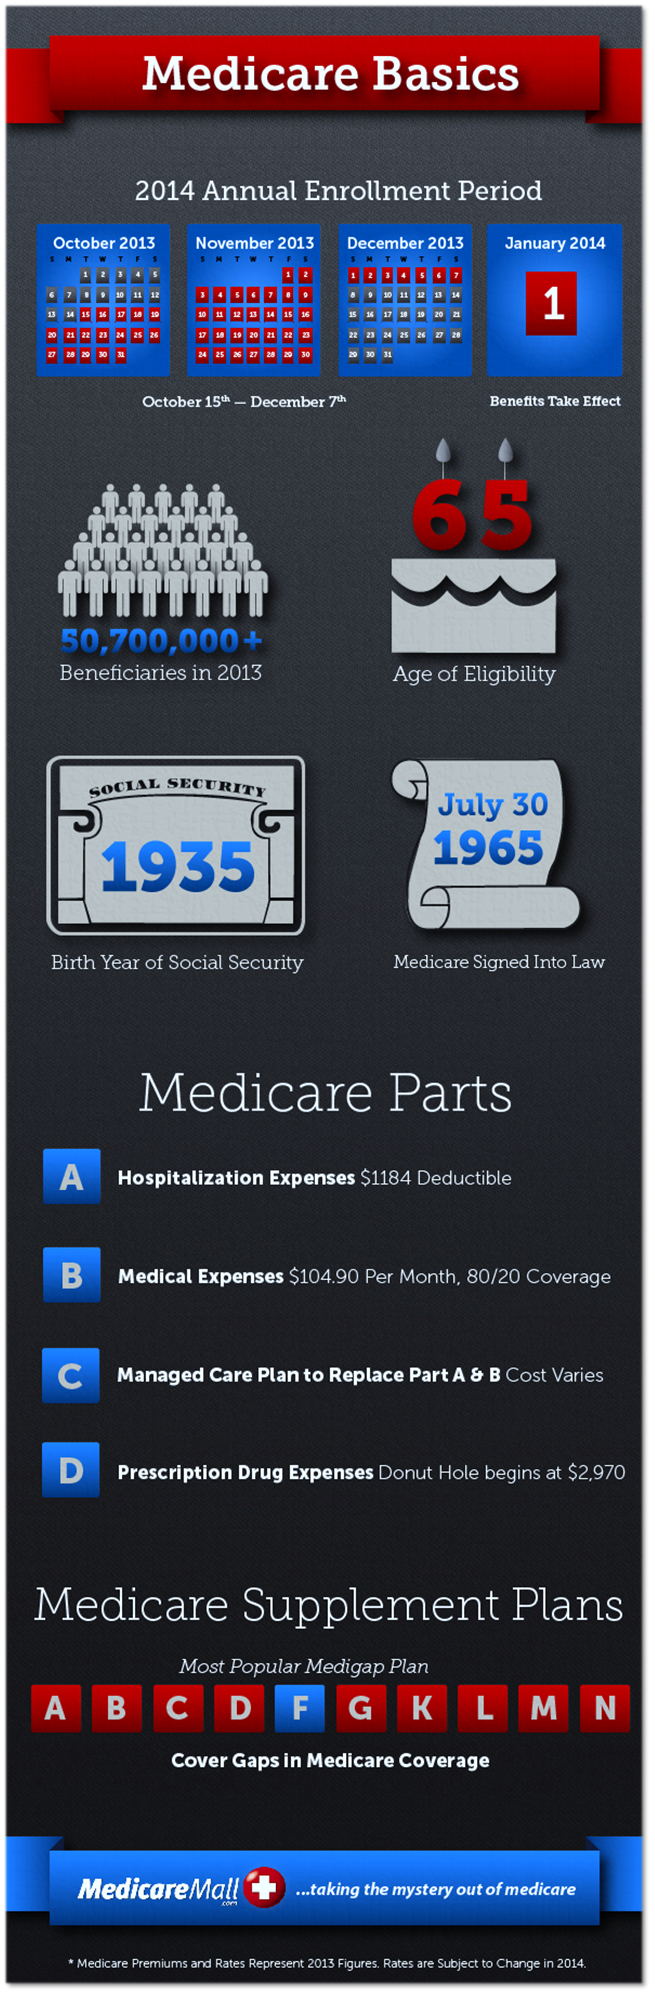 All You Need to Know About Medicare: Medicare Basics